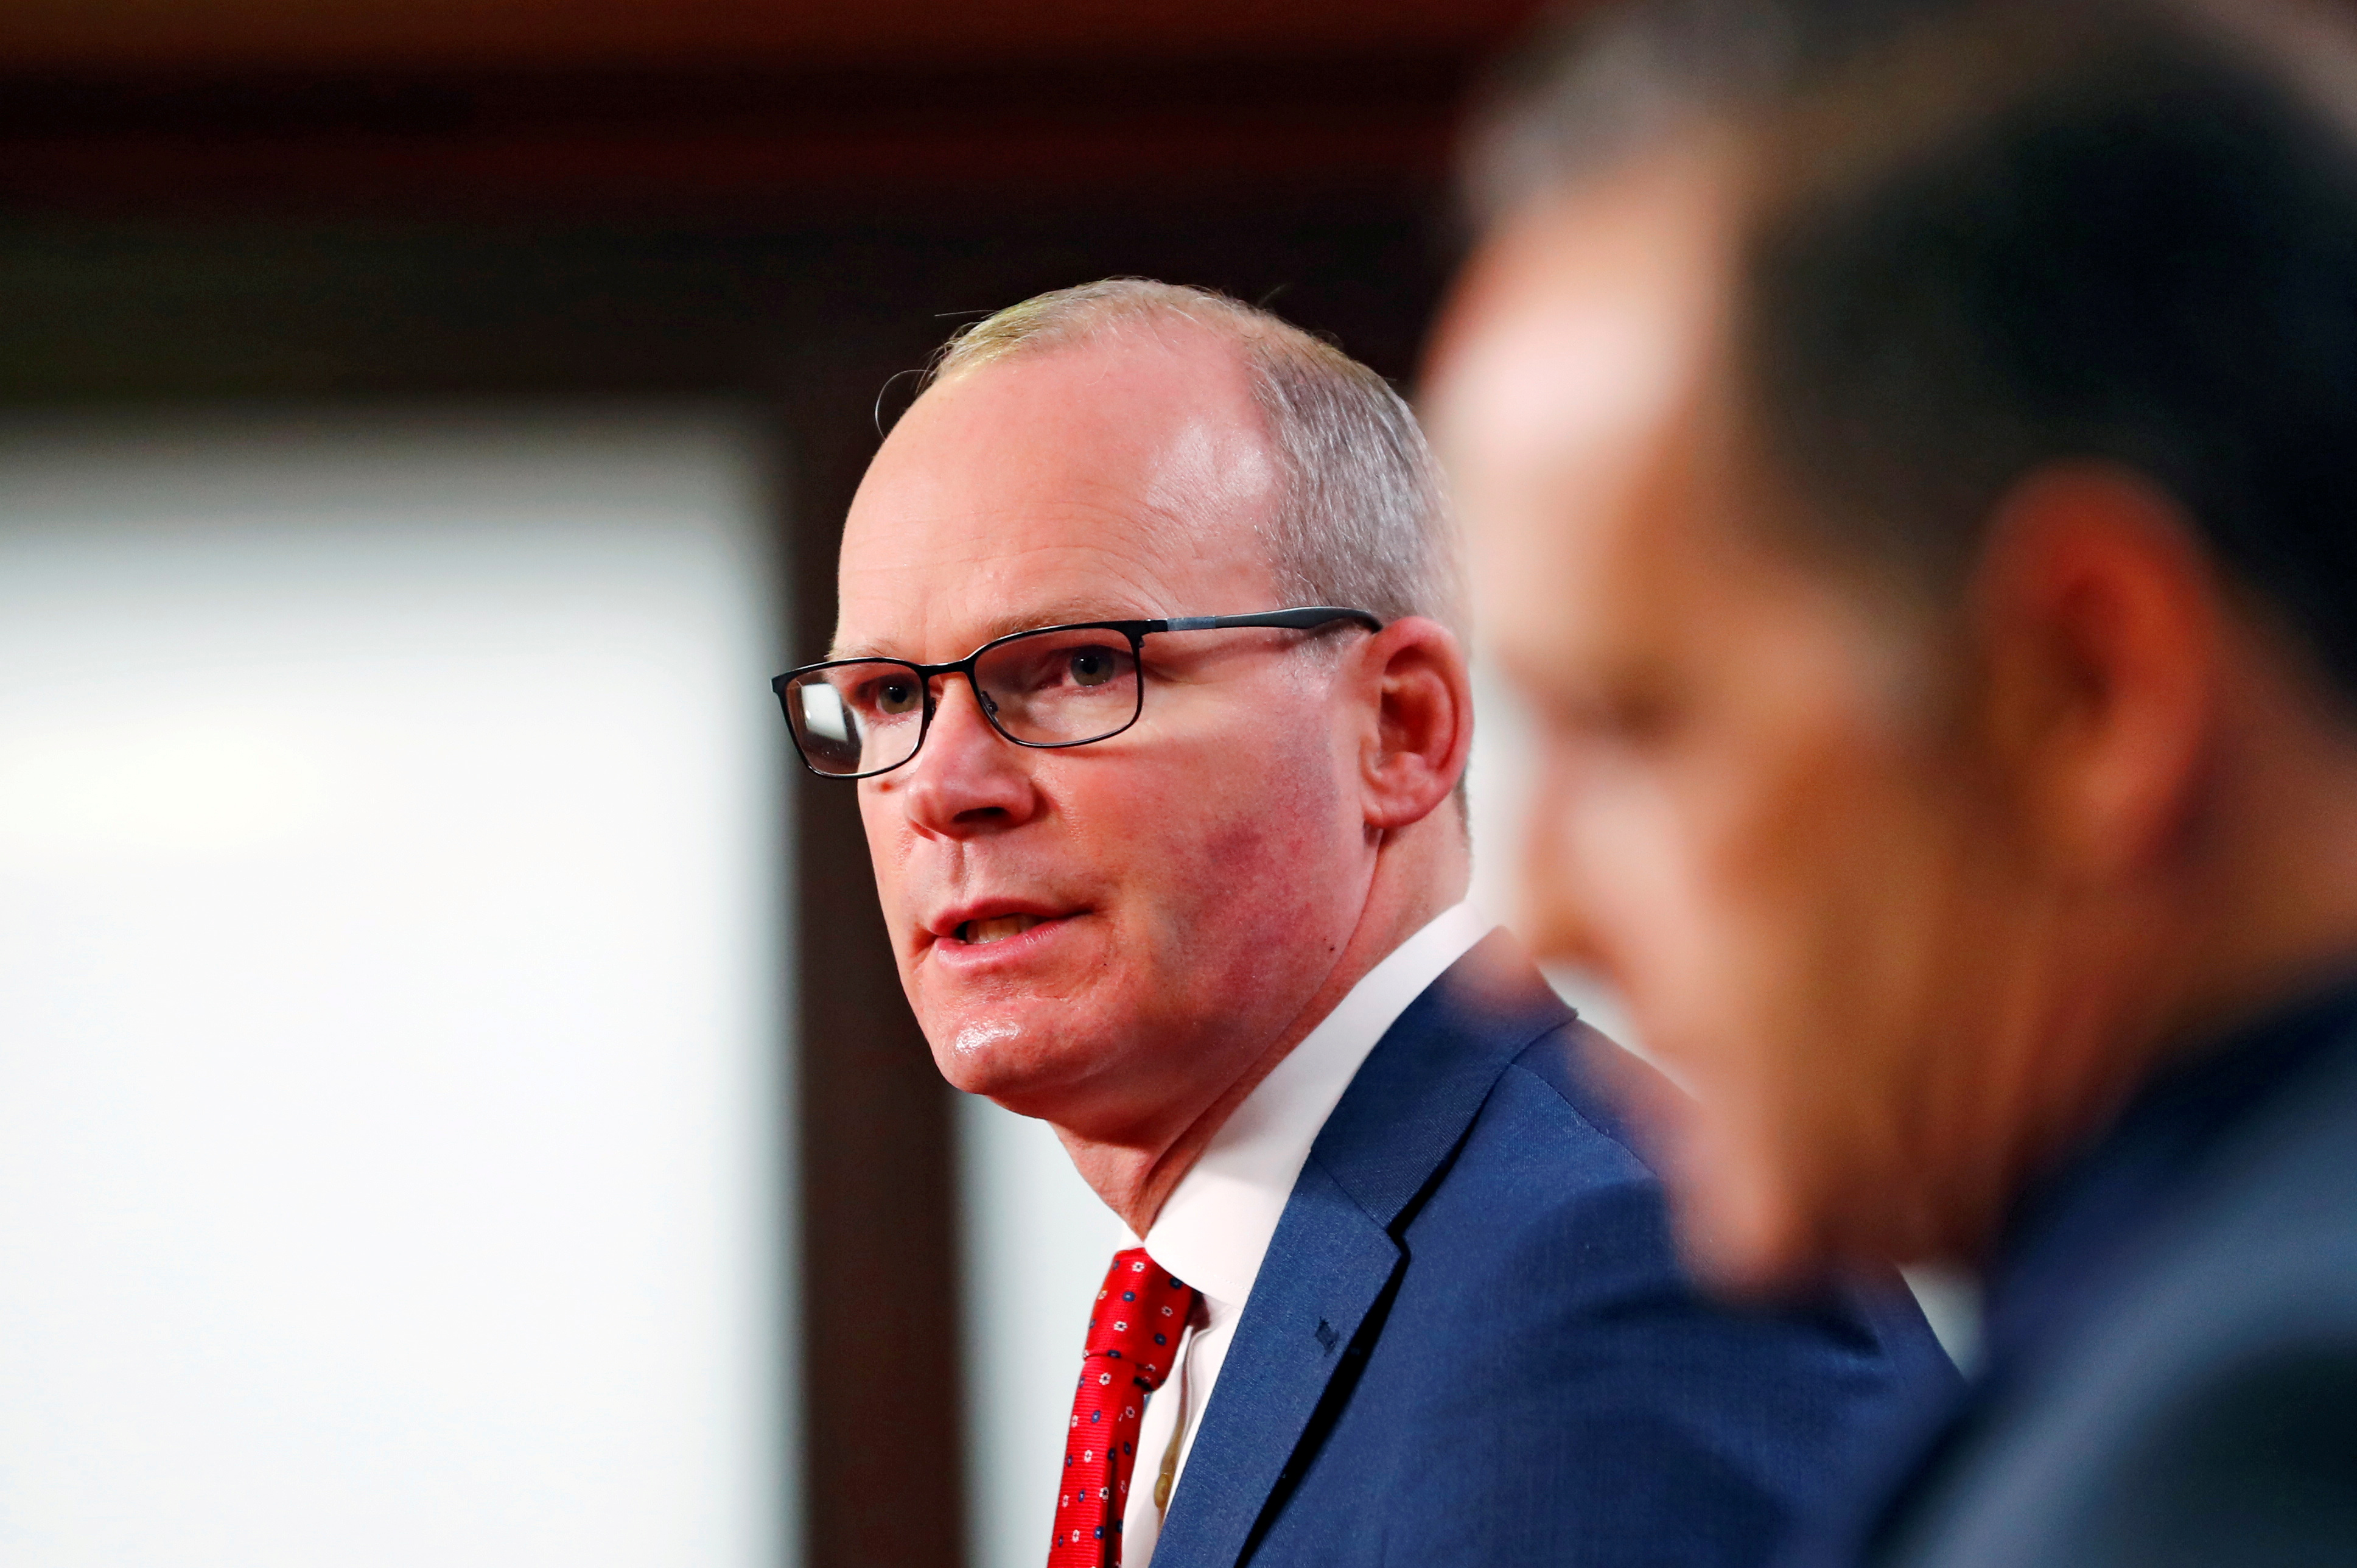 Irish FM Coveney and his German counterpart Maas attend news conference in Berlin